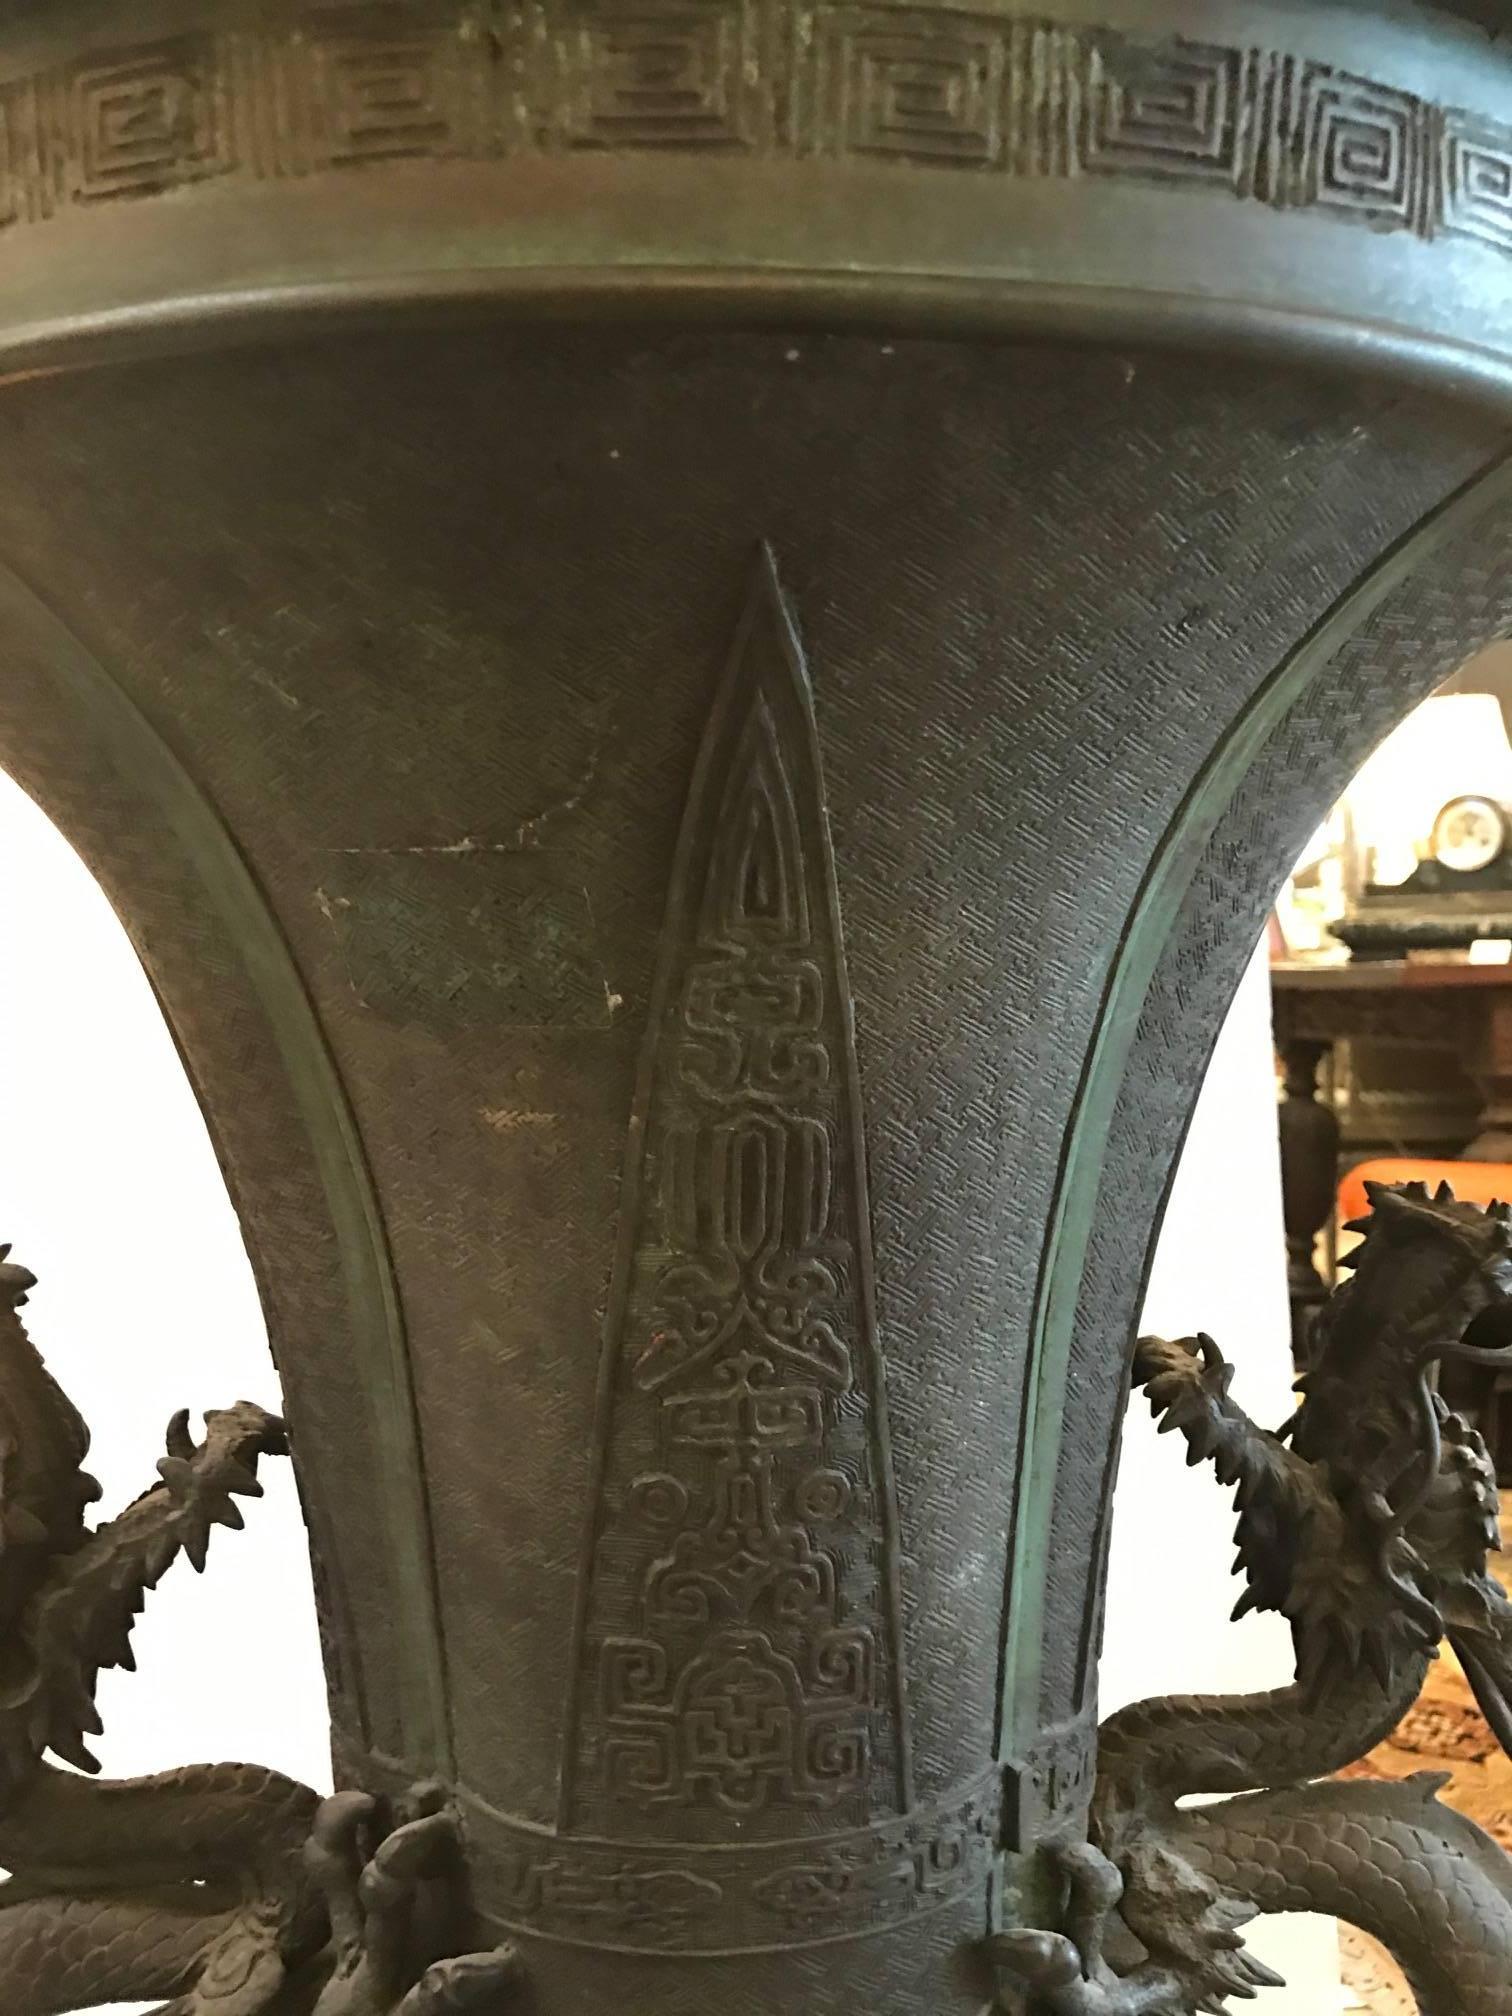 A monumental antique Japanese floor vase, Meiji period, 1880s. Antique Japanese copy of a Chinese Gu form oversize vase. Signed on the bottom, this vase is patinated in the original oxidation, some pitting, old repairs and flaws in the making.